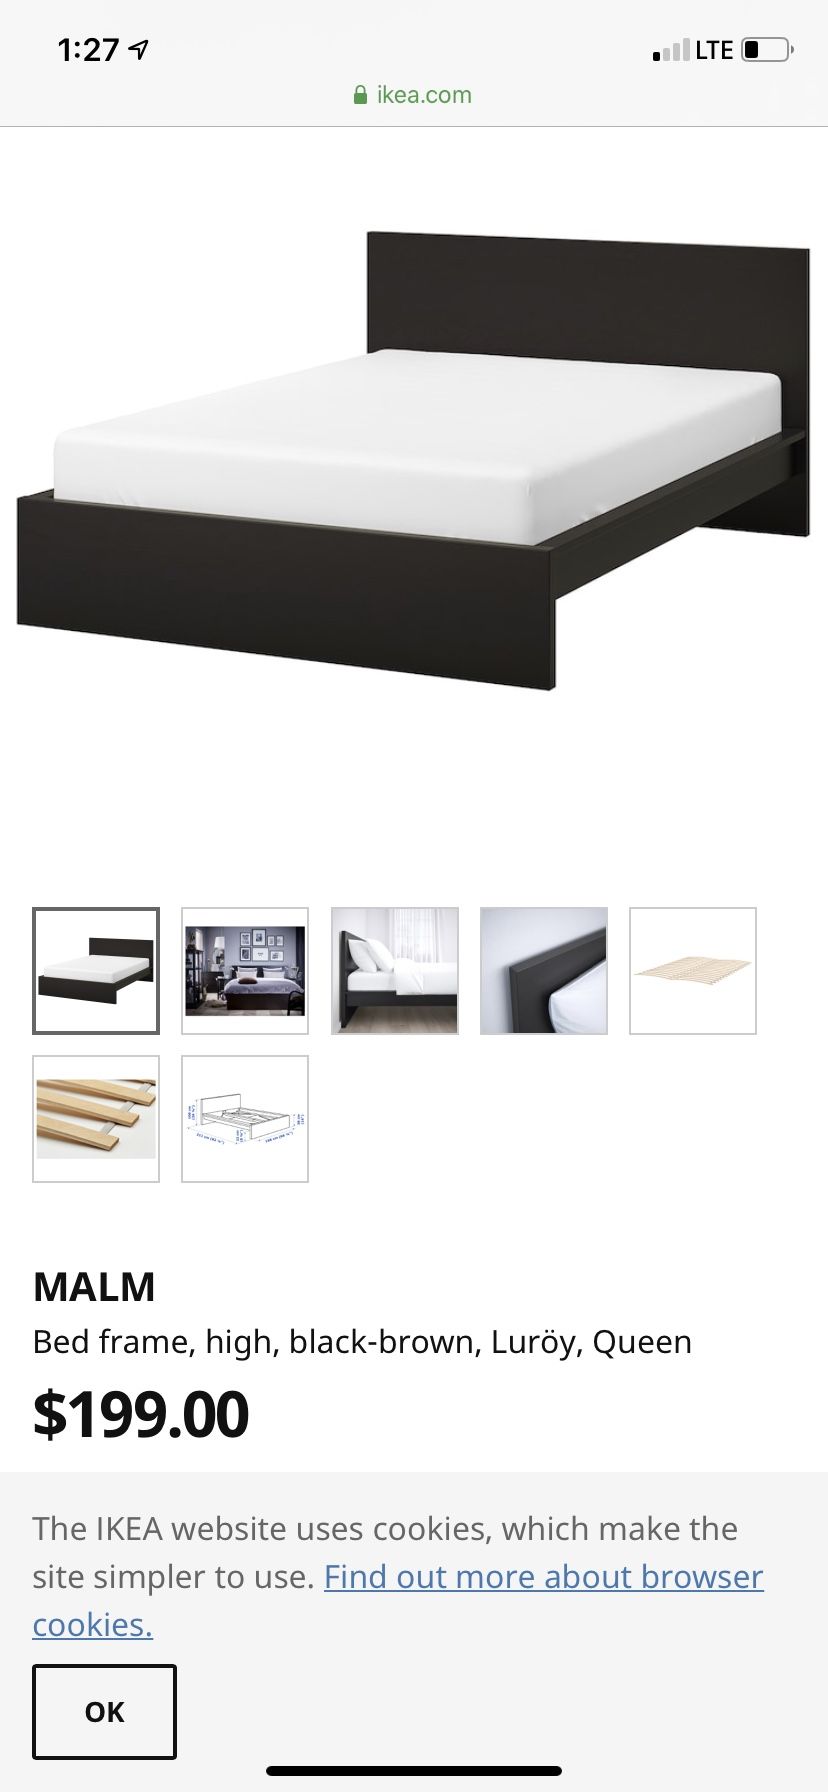 Queen bed frame from ikea